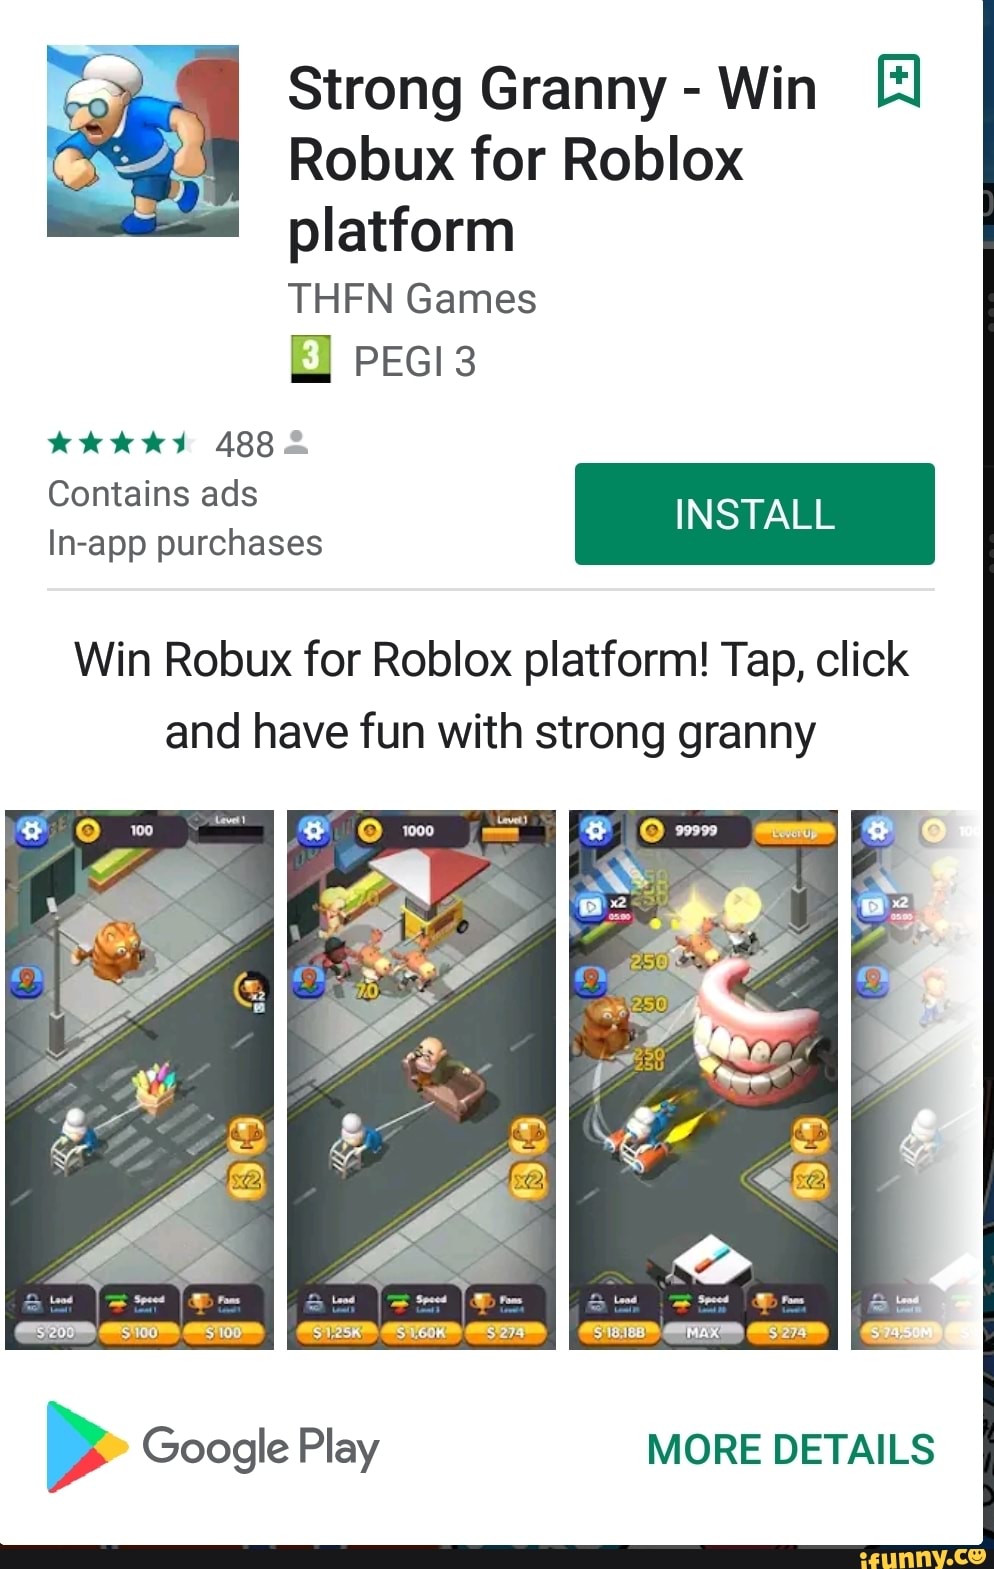 Strong Granny Win El Platform Thfn Games Contains Ads Install In App Purchases Win Robux For Roblox Platform Tap Click And Have Fun With Strong Granny Ifunny - strong granny – win robux for roblox platform